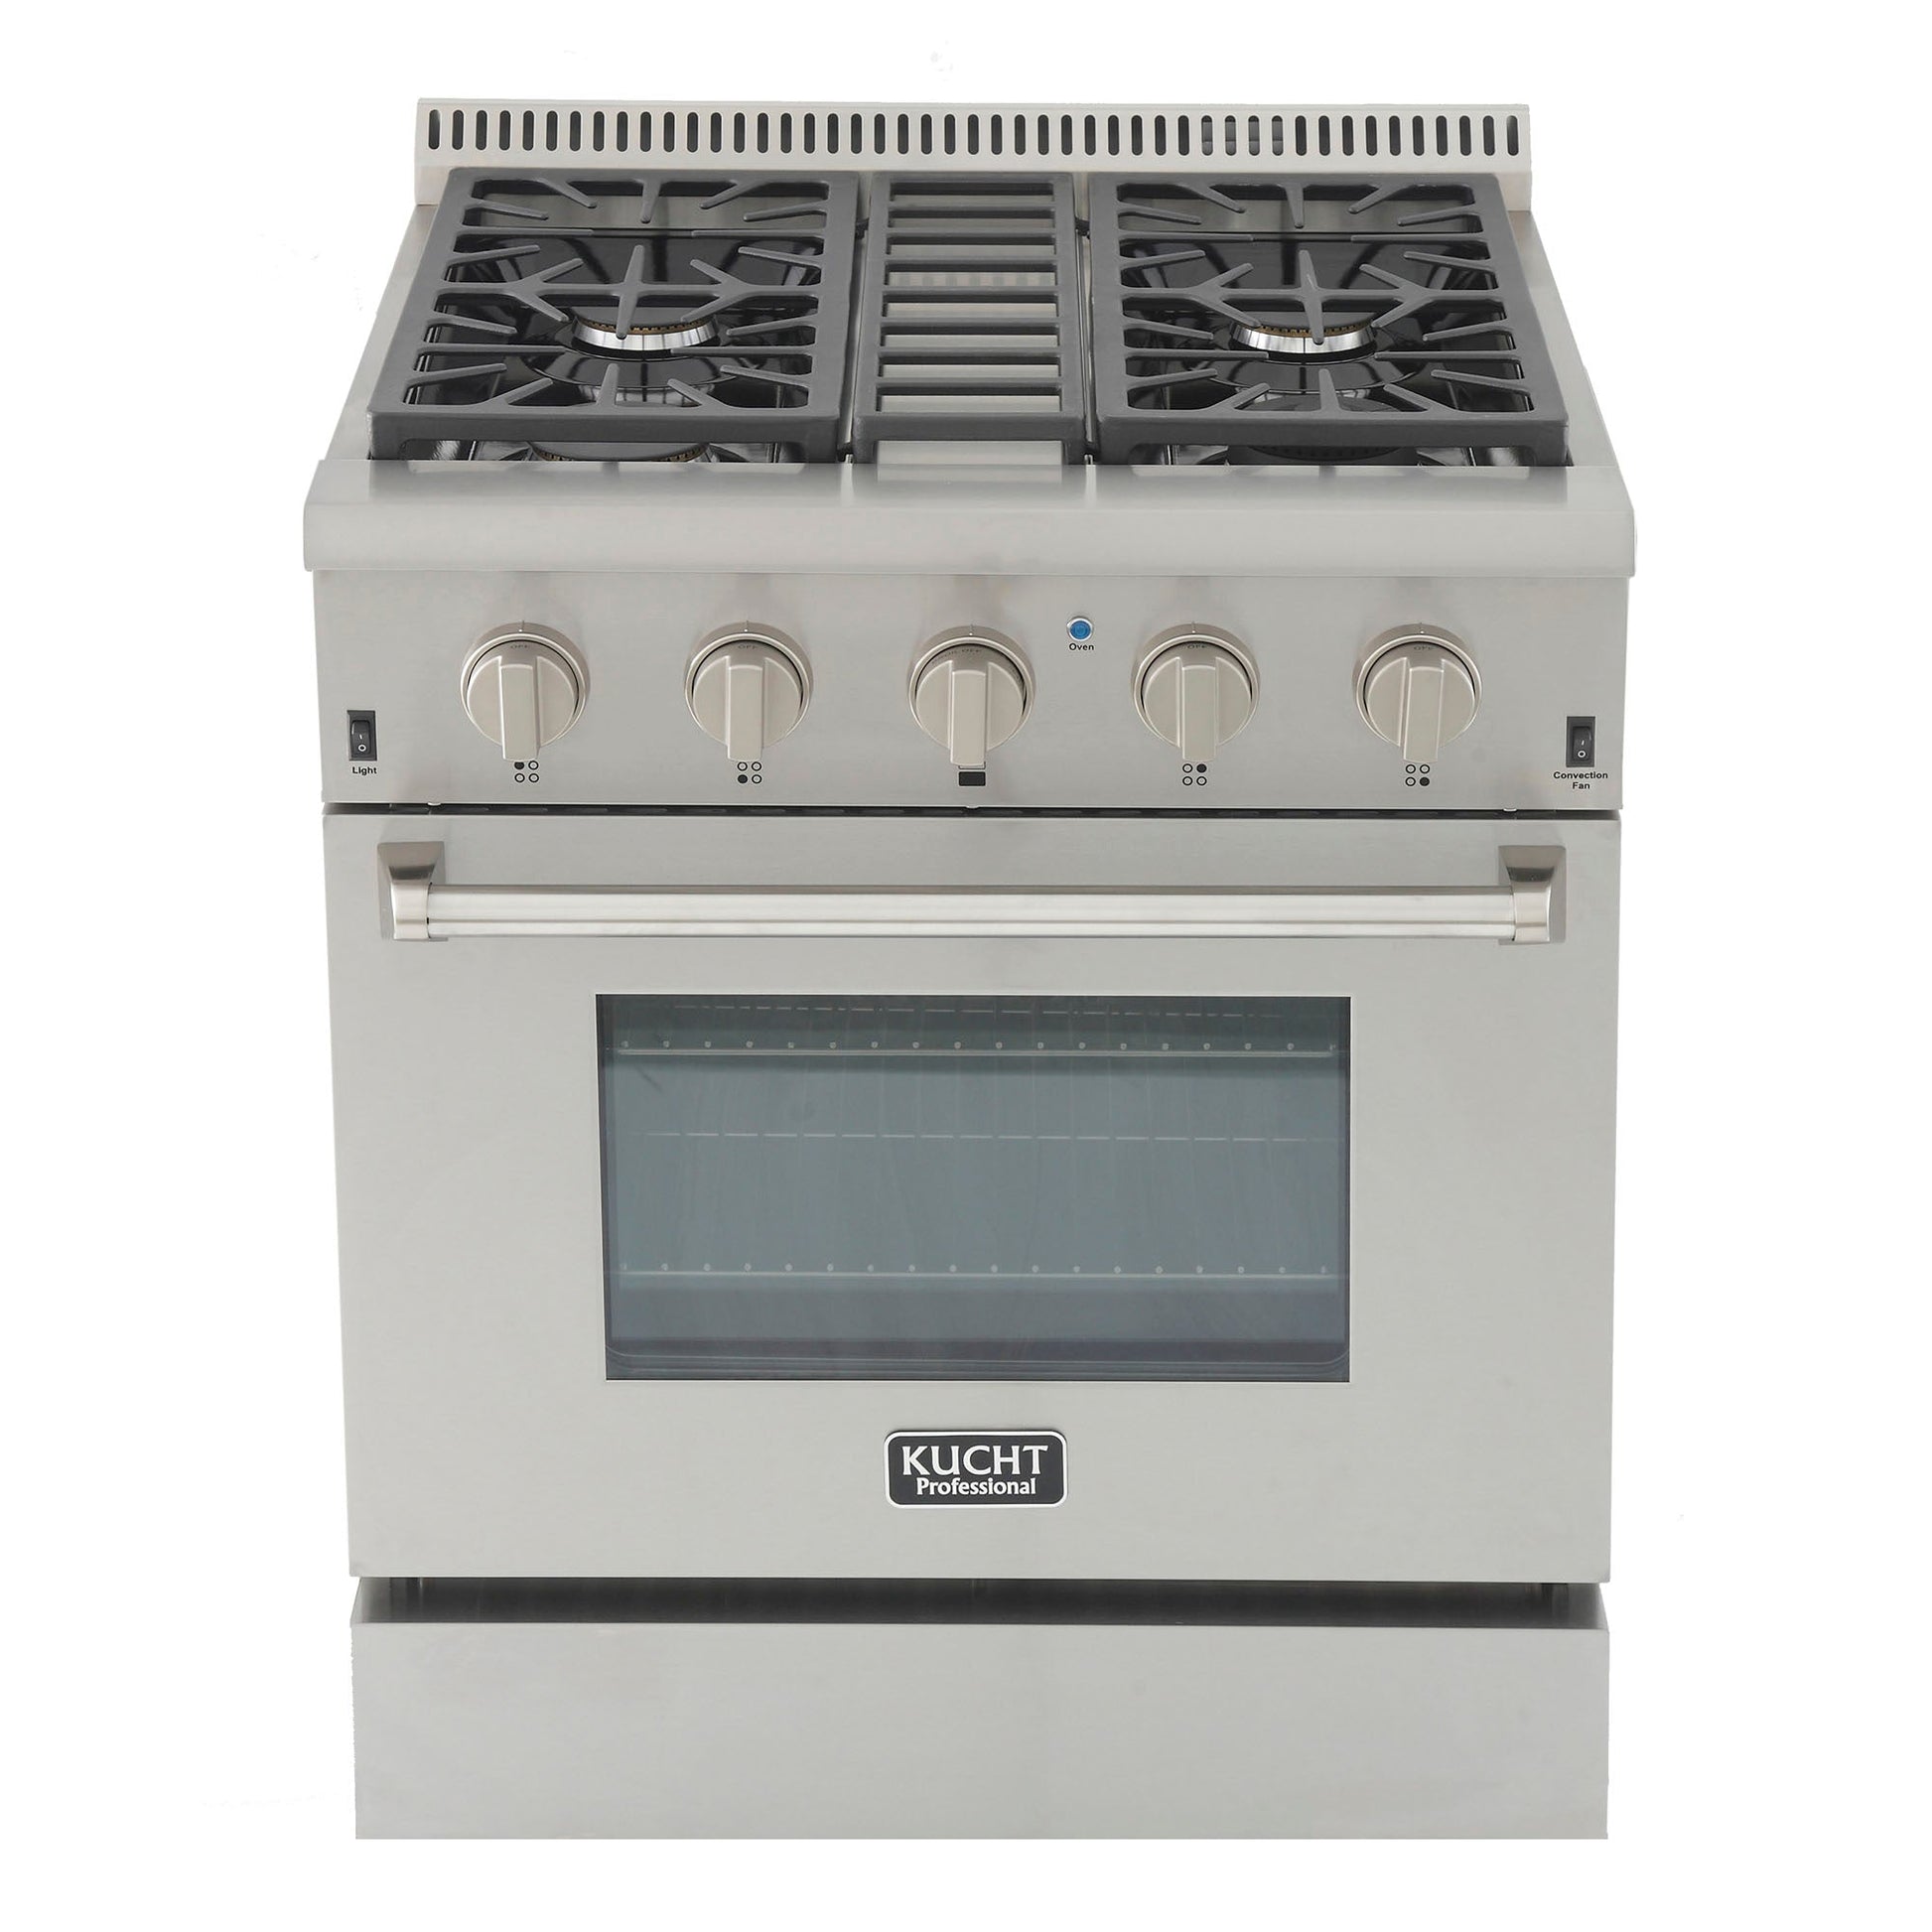 Kucht KRD Series 30" Freestanding Propane Gas Dual Fuel Range With 4 Burners and Classic Silver Knobs